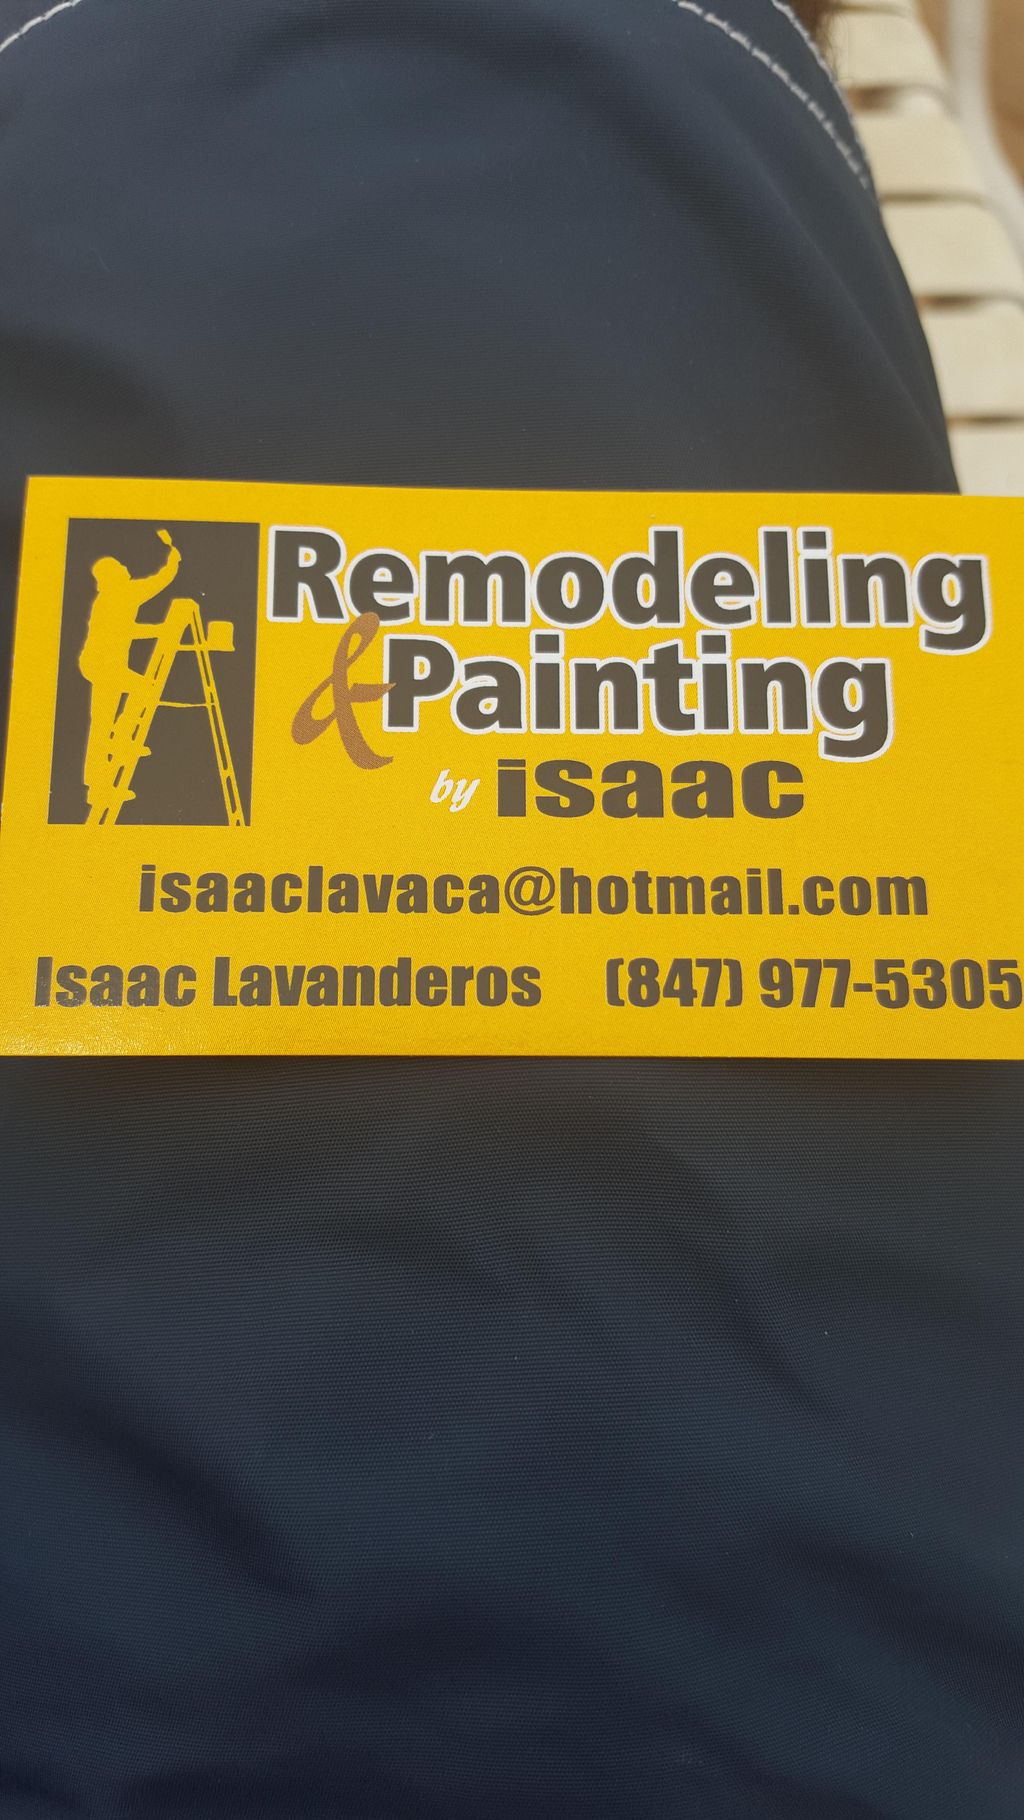 Remodeling & Painting by Isaac